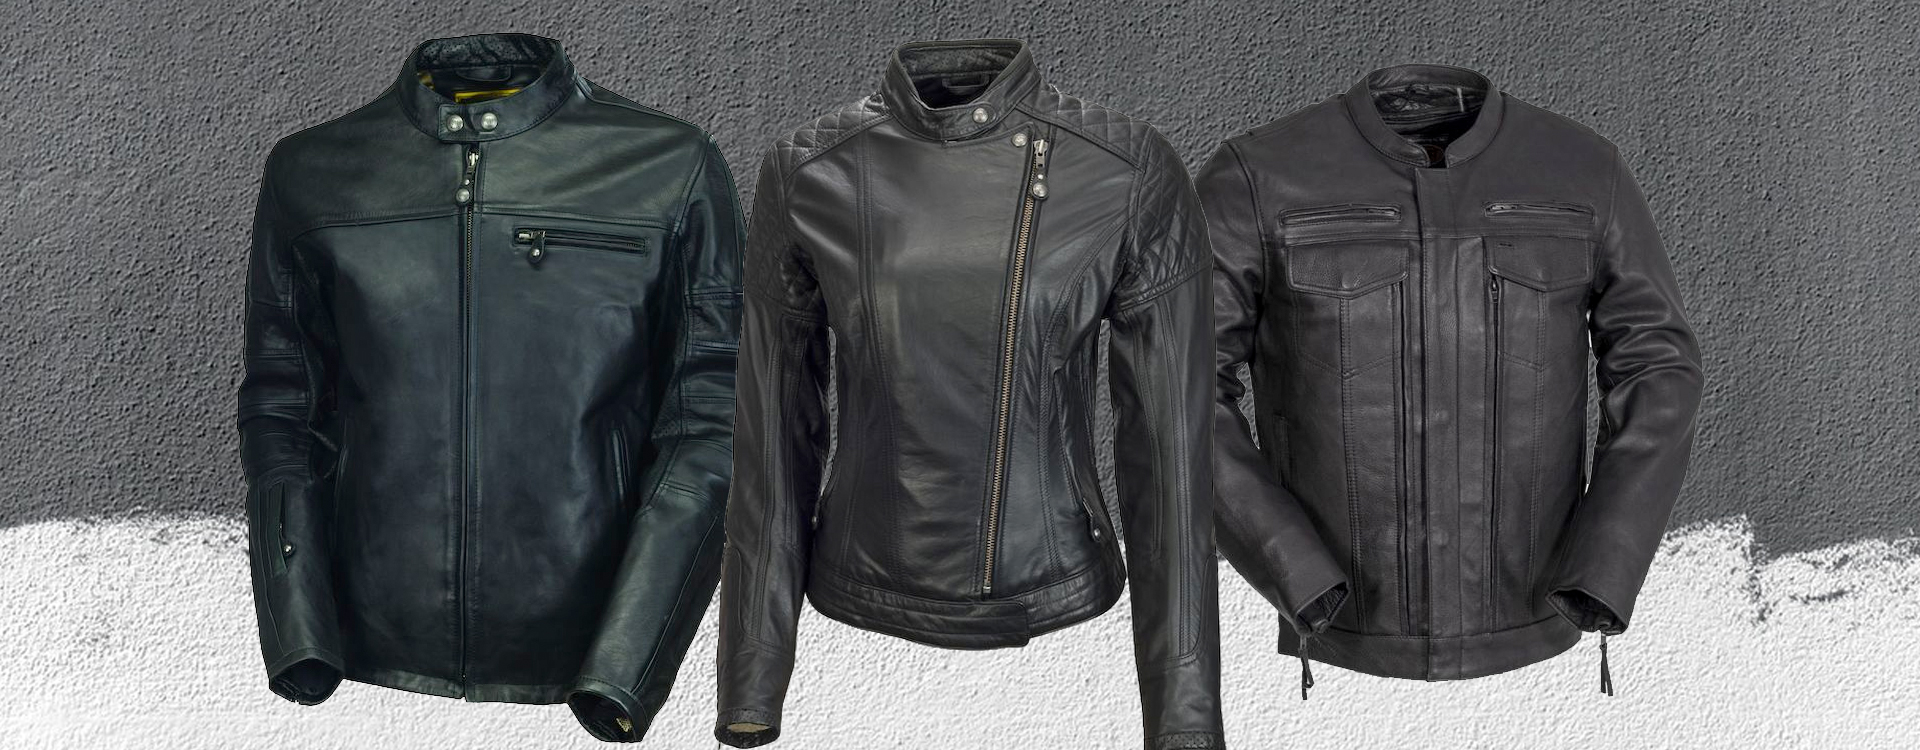 The Best Leather Motorcycle Jackets, Best Leather Motorcycle Jackets 2020